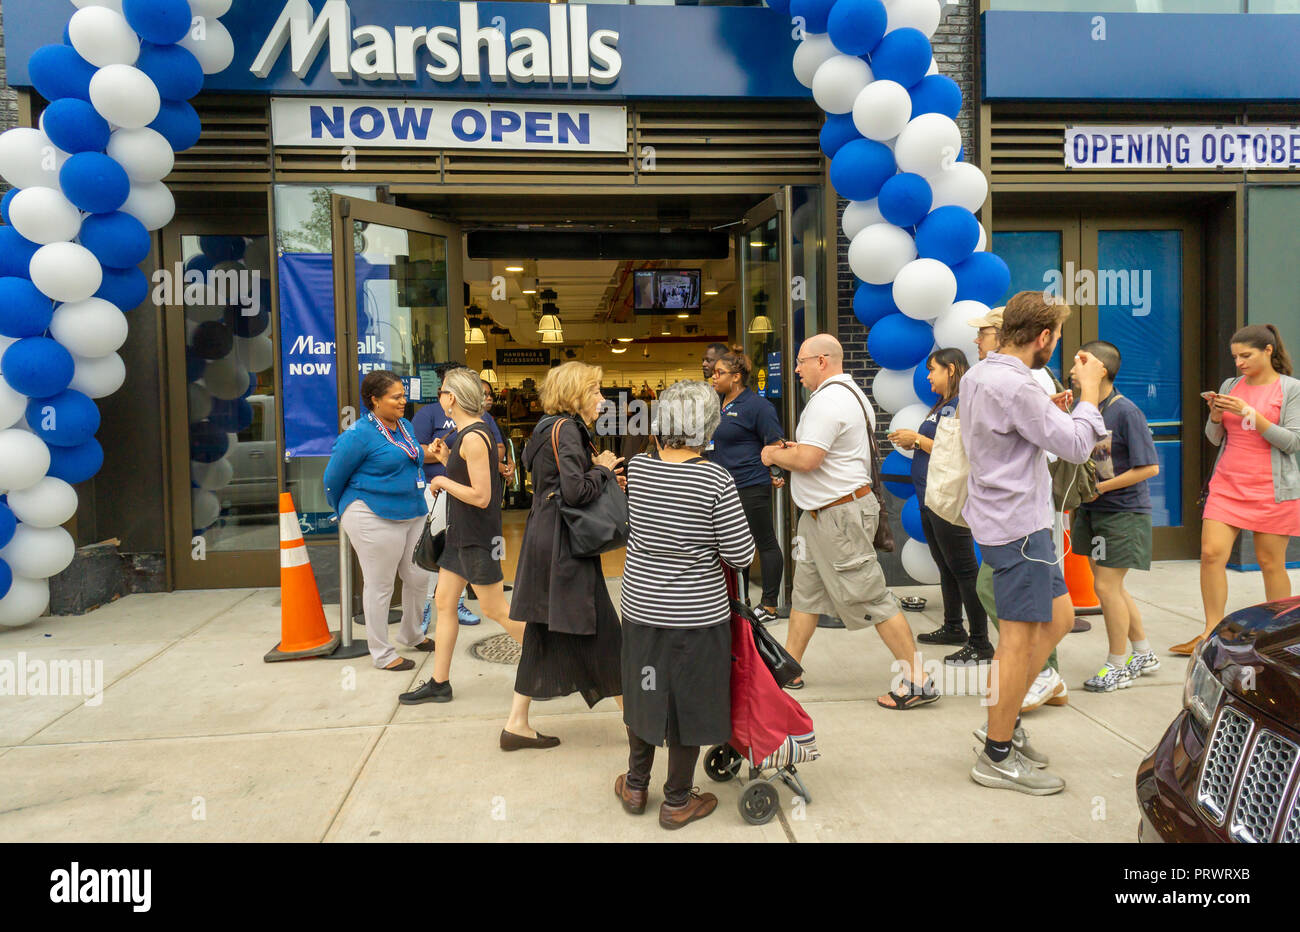 New York, USA. 4th October, 2018. Customers in the brand new off-price Marshalls store in the Lower East Side neighborhood of in New York during it's grand opening on Thursday, October 4, 2018. Marshalls is a brand of the TJX Companies, parent of Marshalls, T. J. Maxx, HomeGoods and other brands. TJX Companies recently reported comps that grew 6% over year citing increased traffic in its Marmaxx division (Marshalls, TX Maxx). (Â© Richard B. Levine) Credit: Richard Levine/Alamy Live News Stock Photo